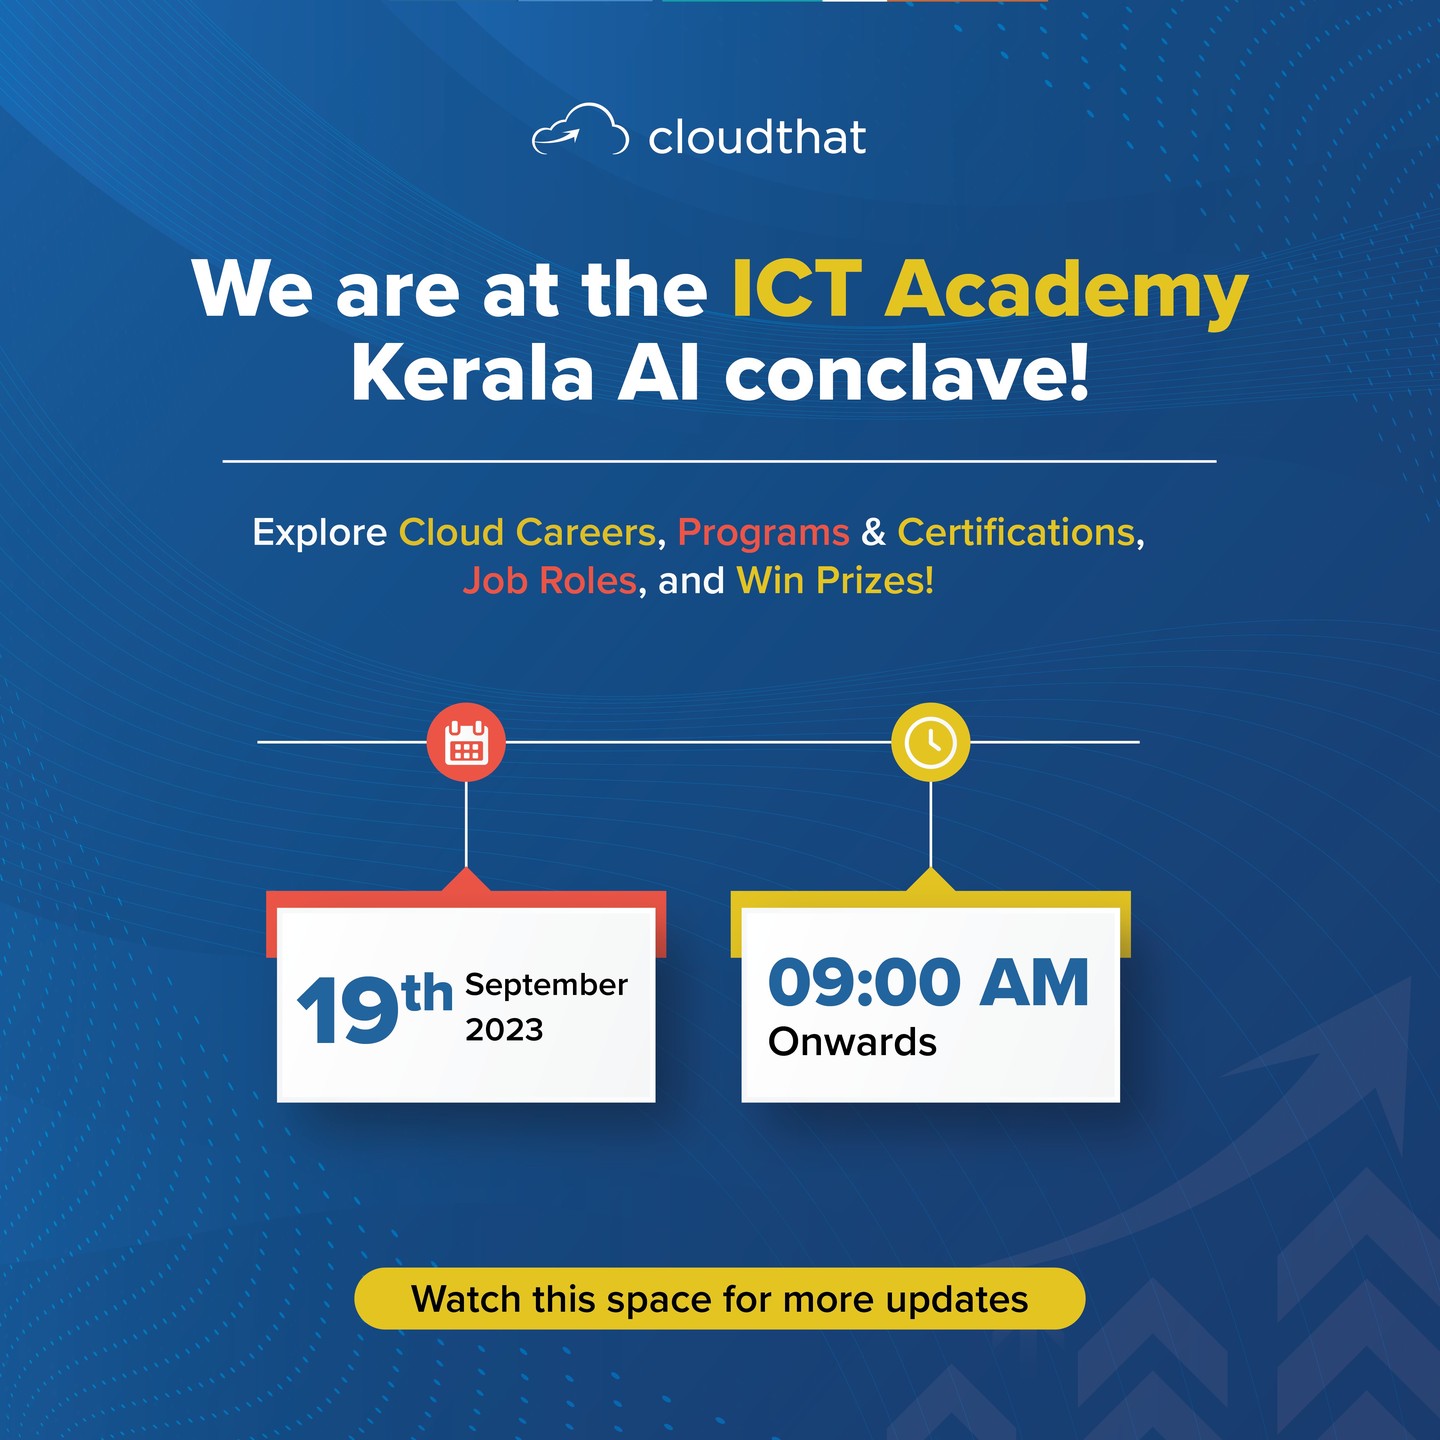 Today is the big day, and we're thrilled to be part of the 2023 edition of ICSET, happening at the Adlux International Convention and Exhibition Centre Convention Centre in Angamaly. This year's theme is all about 'The AI Gyration. We are all set to take AI Gyration to the next level!

Here's what you can expect at our booth:

1. Career Prospects in the Cloud
2. Information on our Programs and Certifications
3. Job opportunities
4. Exciting giveaway

Join us and get a chance to win amazing goodies.
@ictkerala 

#ICSET2023 #AIInnovation #AIRevolution #AIgyration #CloudCareer #Certifications #JobOpportunities #TechEvent #AIExperts #Giveaways #CareerDevelopment #TechCommunity #WinPrizes #AIAdvancements #photobooth #TechNetworking #AIEnthusiasts #FutureTech #AICommunity #contestalert #win